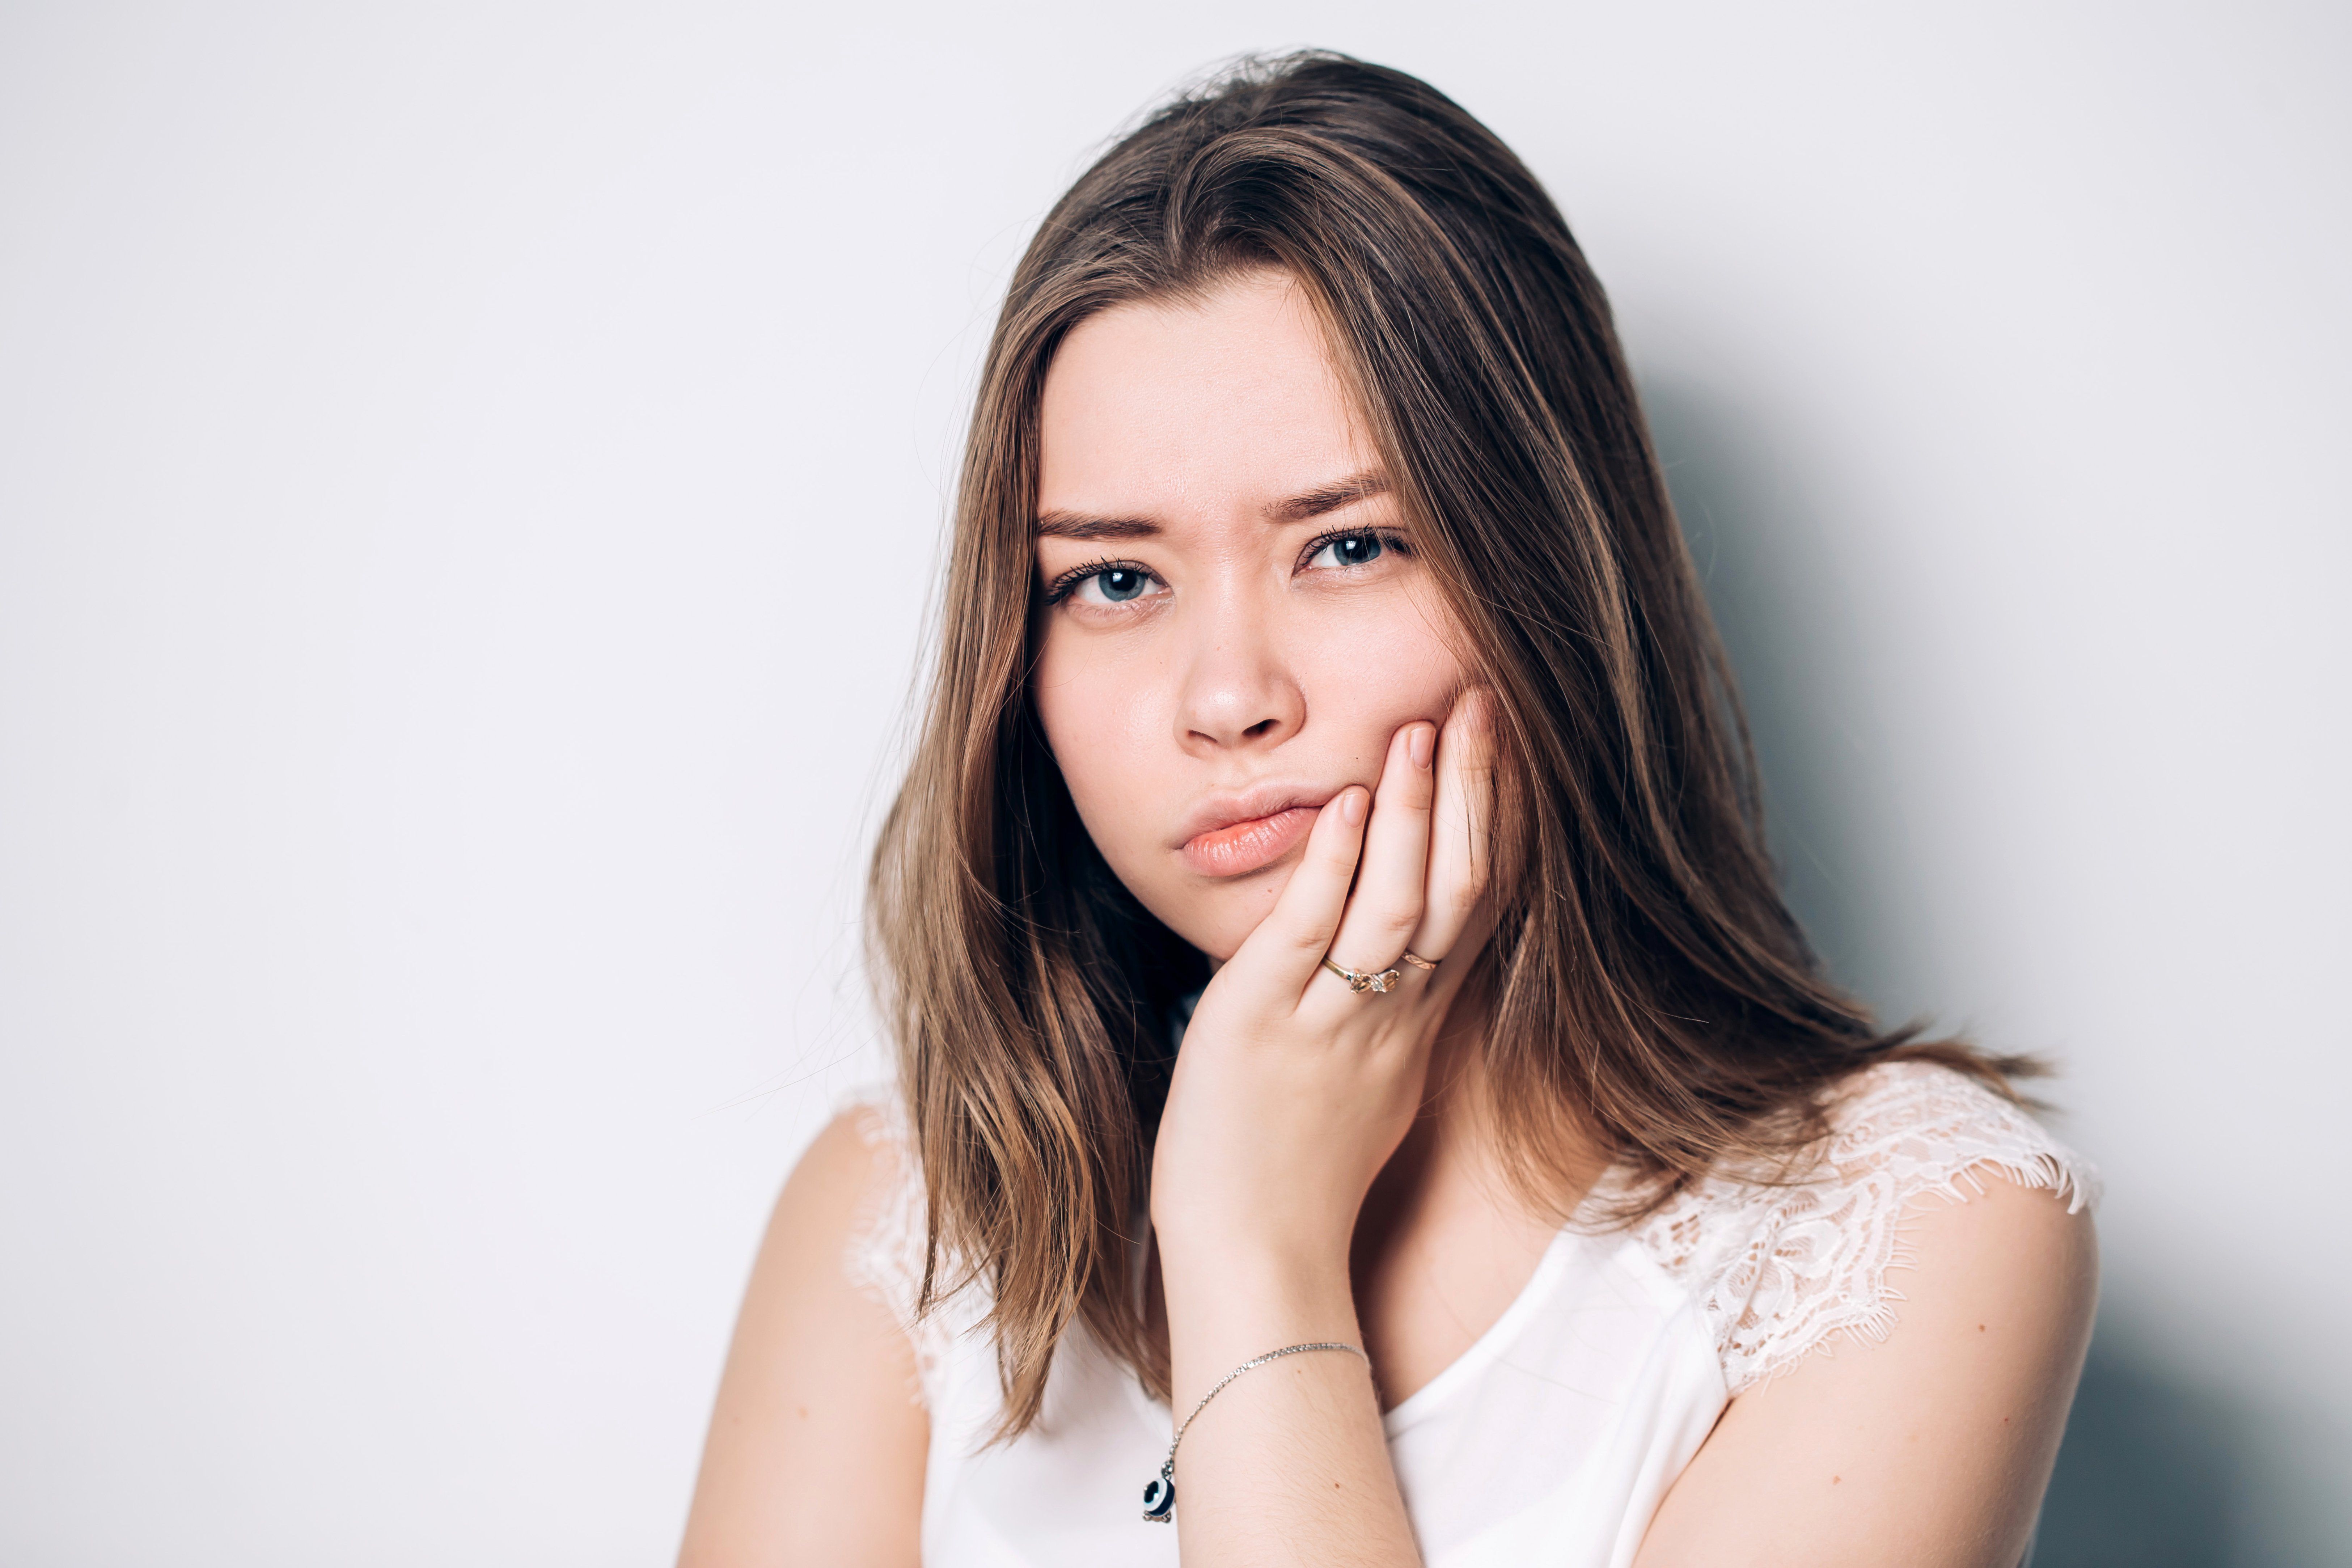 When Should I Get My Wisdom Teeth Removed?